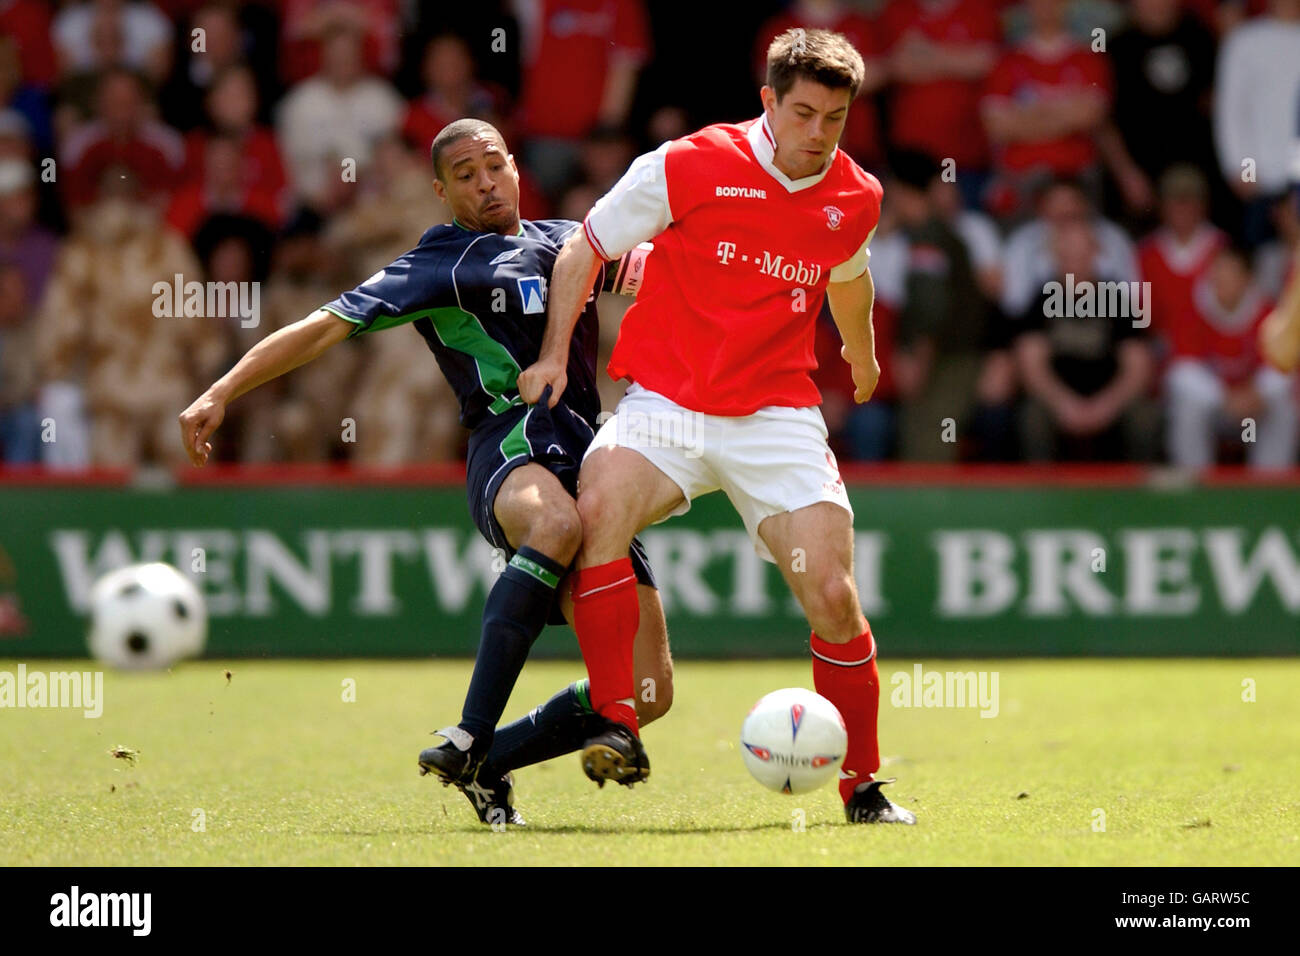 Soccer - Nationwide League Division One - Rotherham United v Nottingham Forest Stock Photo